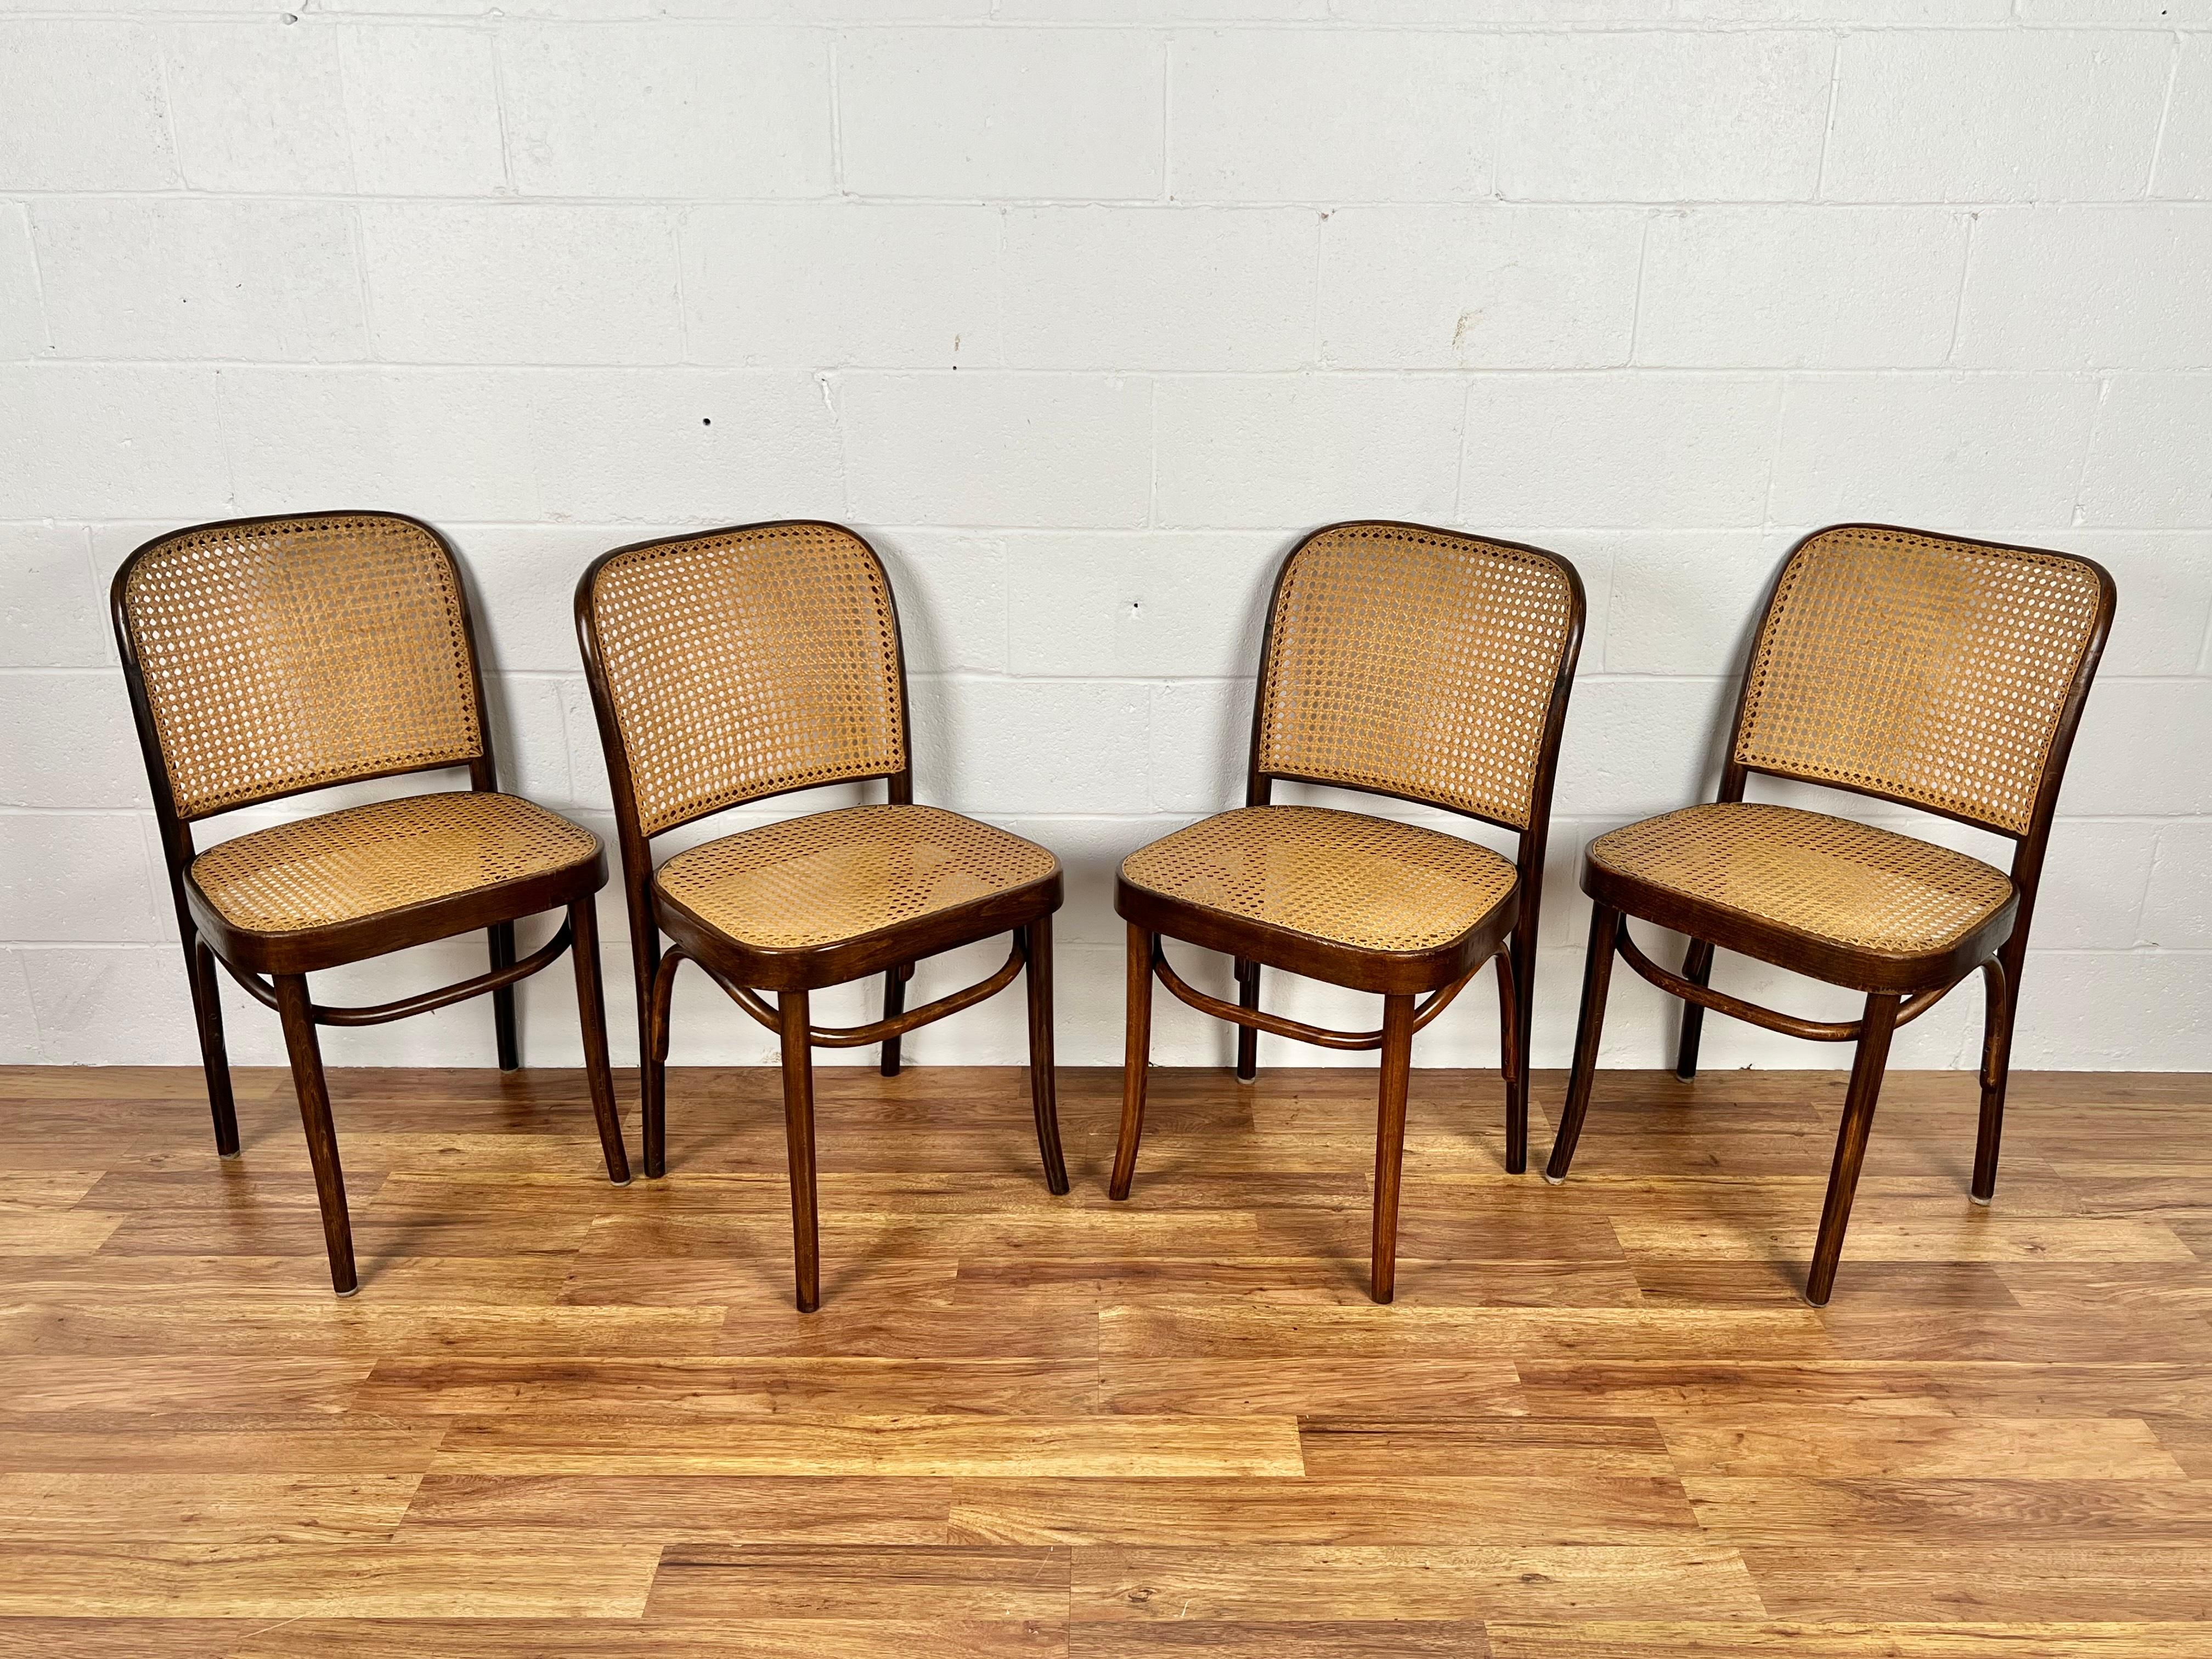 Caning 20th century Josef Hoffmann bentwood hand caned FMG Prague chairs made in Poland